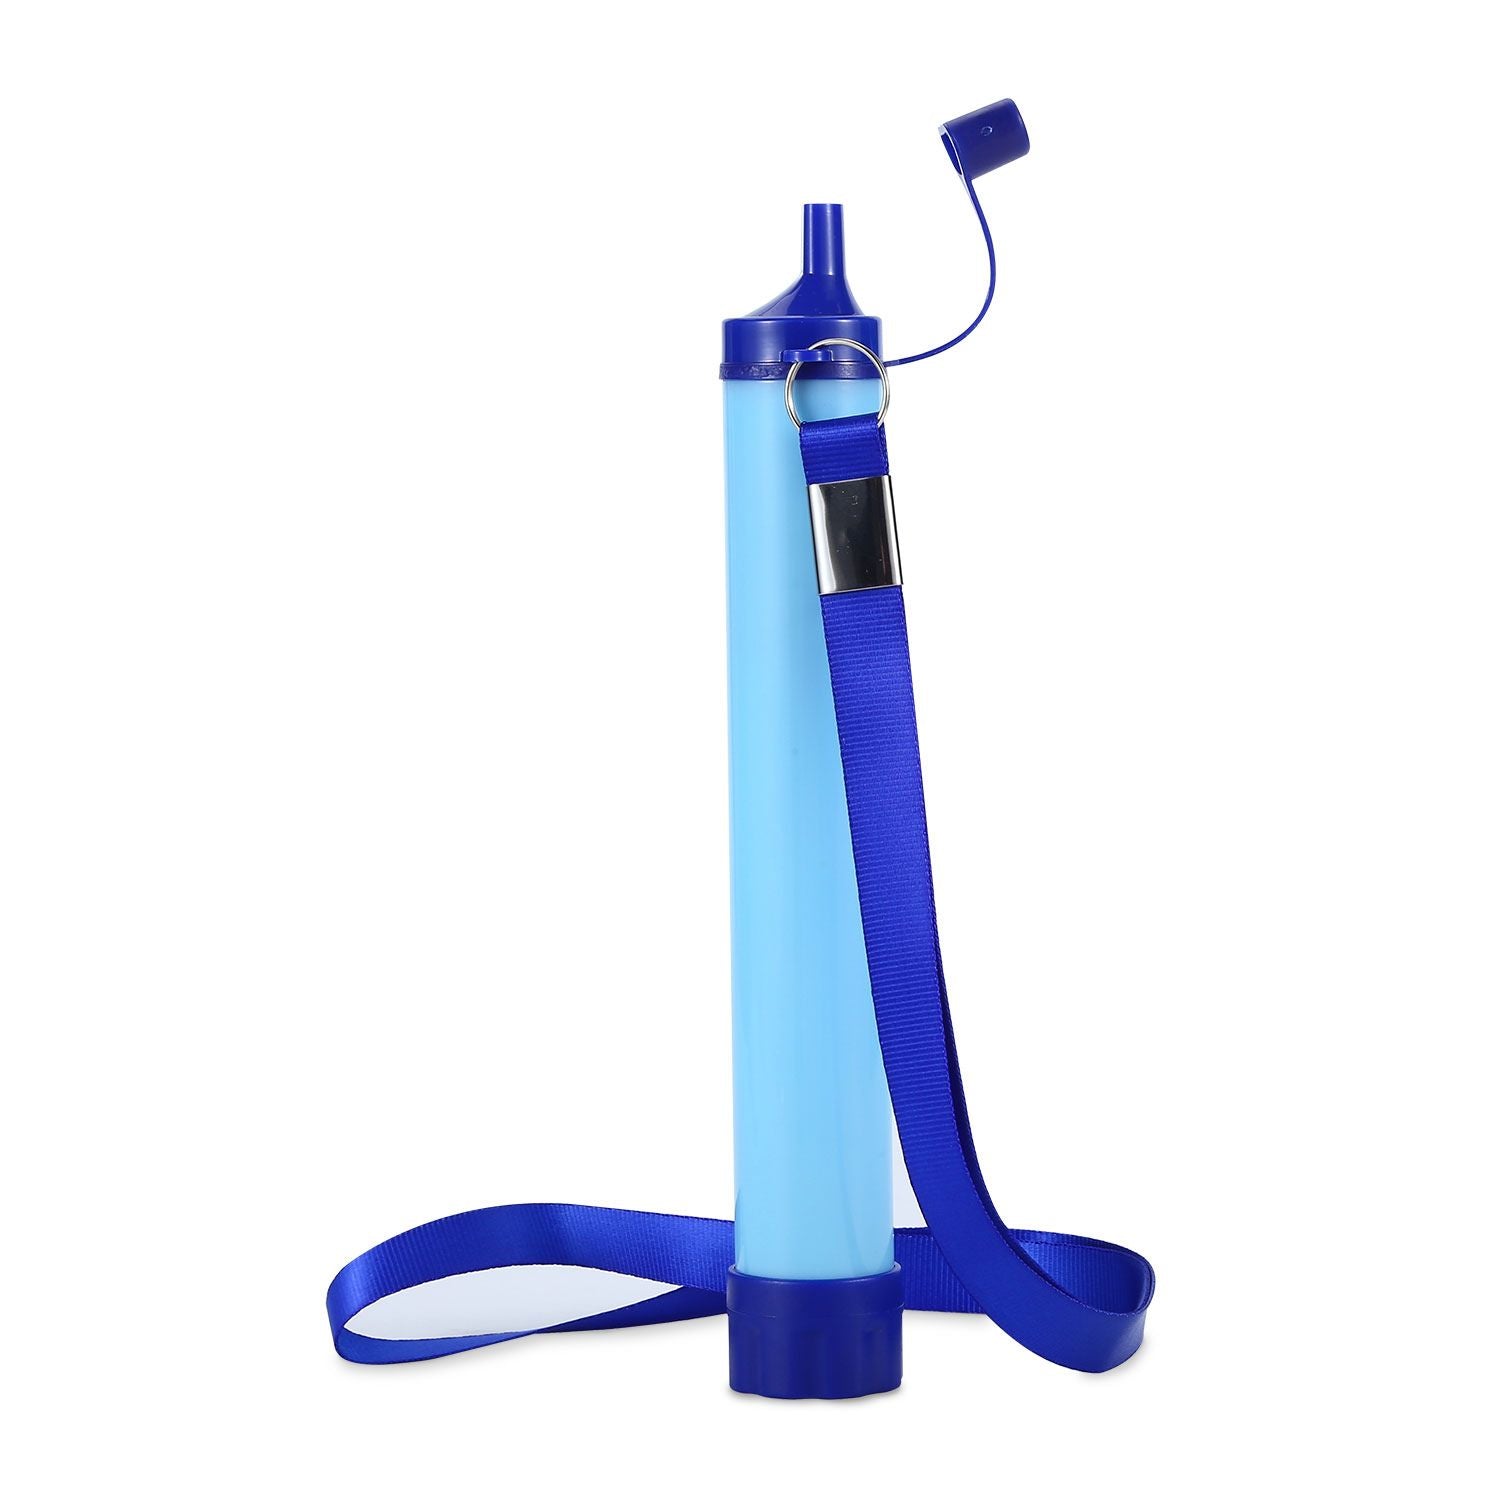 Water Filter, Ultralight and Durable, Long-Lasting Up to 1500L Water, Easy Carry